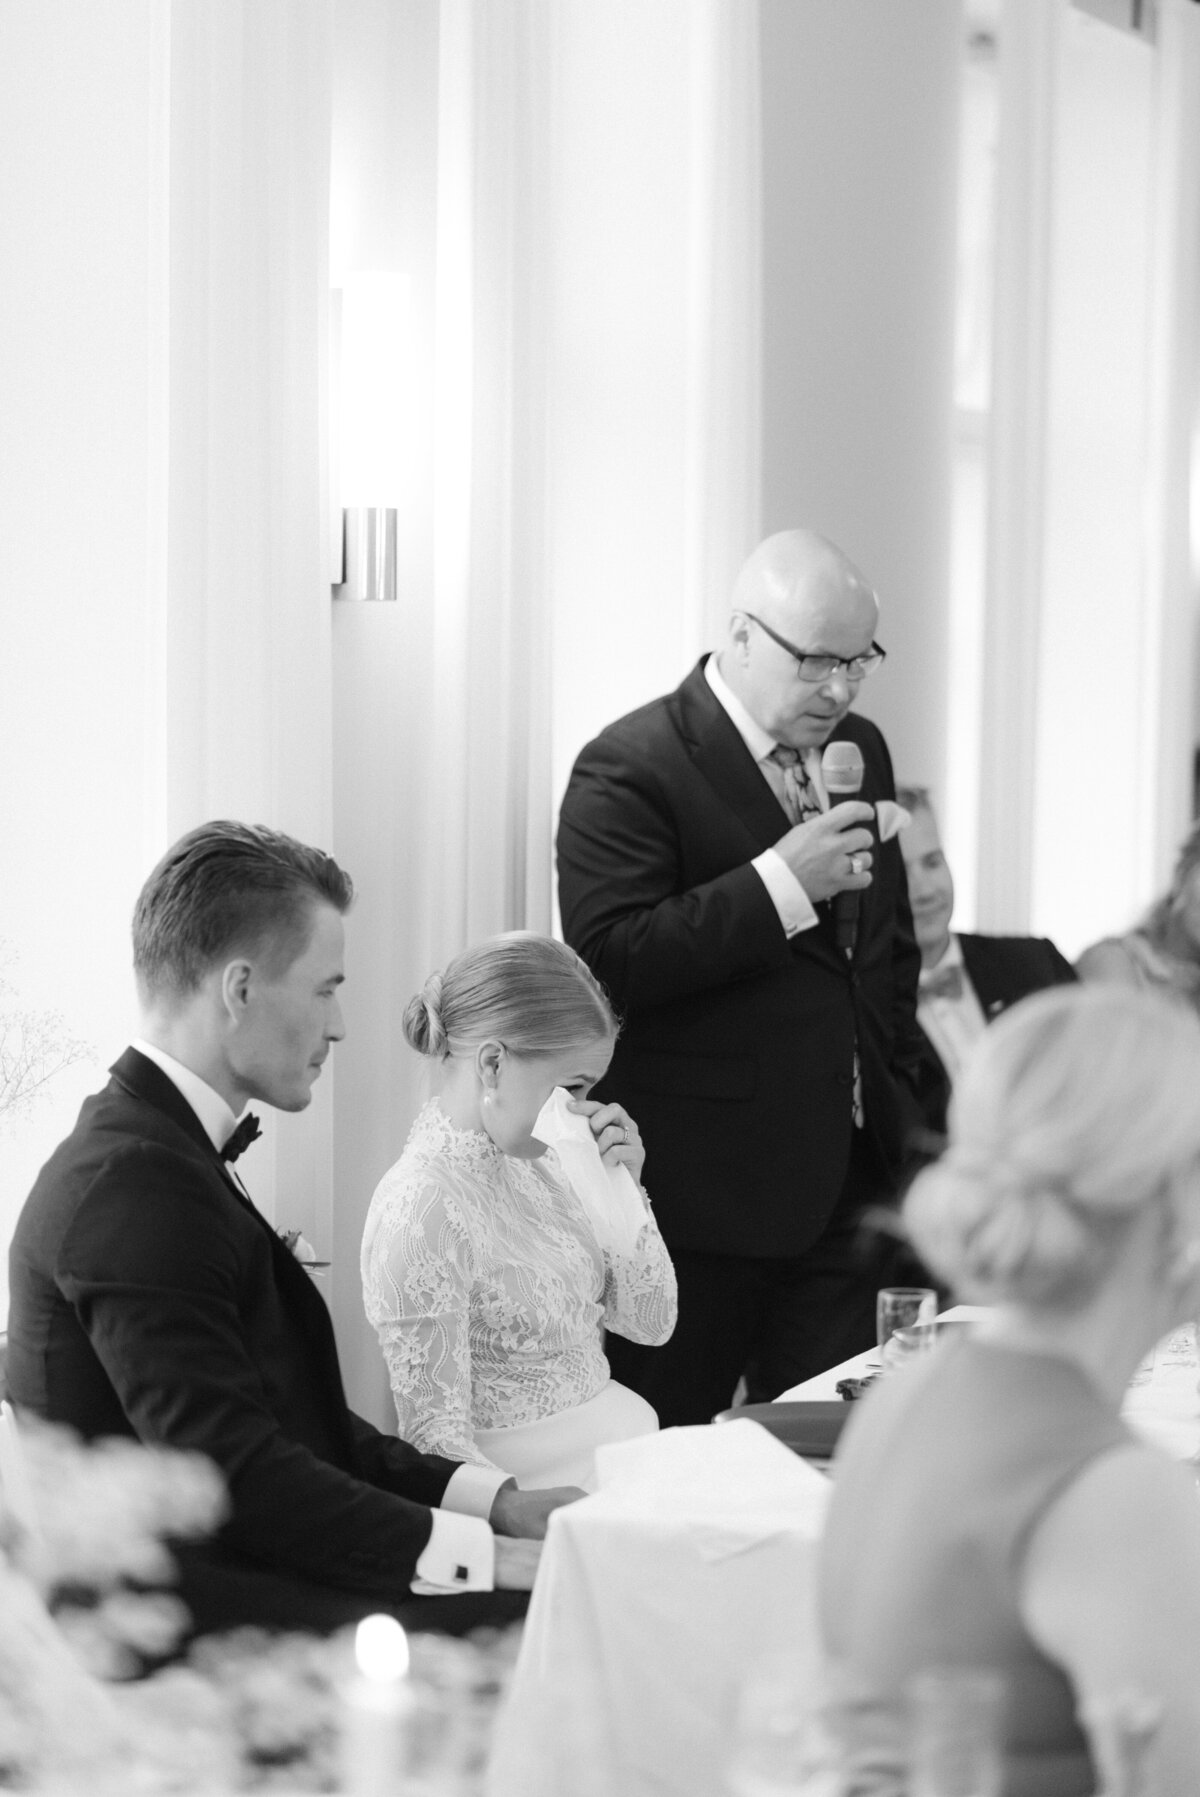 Documentary wedding photograph of a wedding guest giving a speech to bride and groom in Airisniemi manor in Turku, Finland. Atmosphere captured by wedding photographer Hannika Gabrielsson.